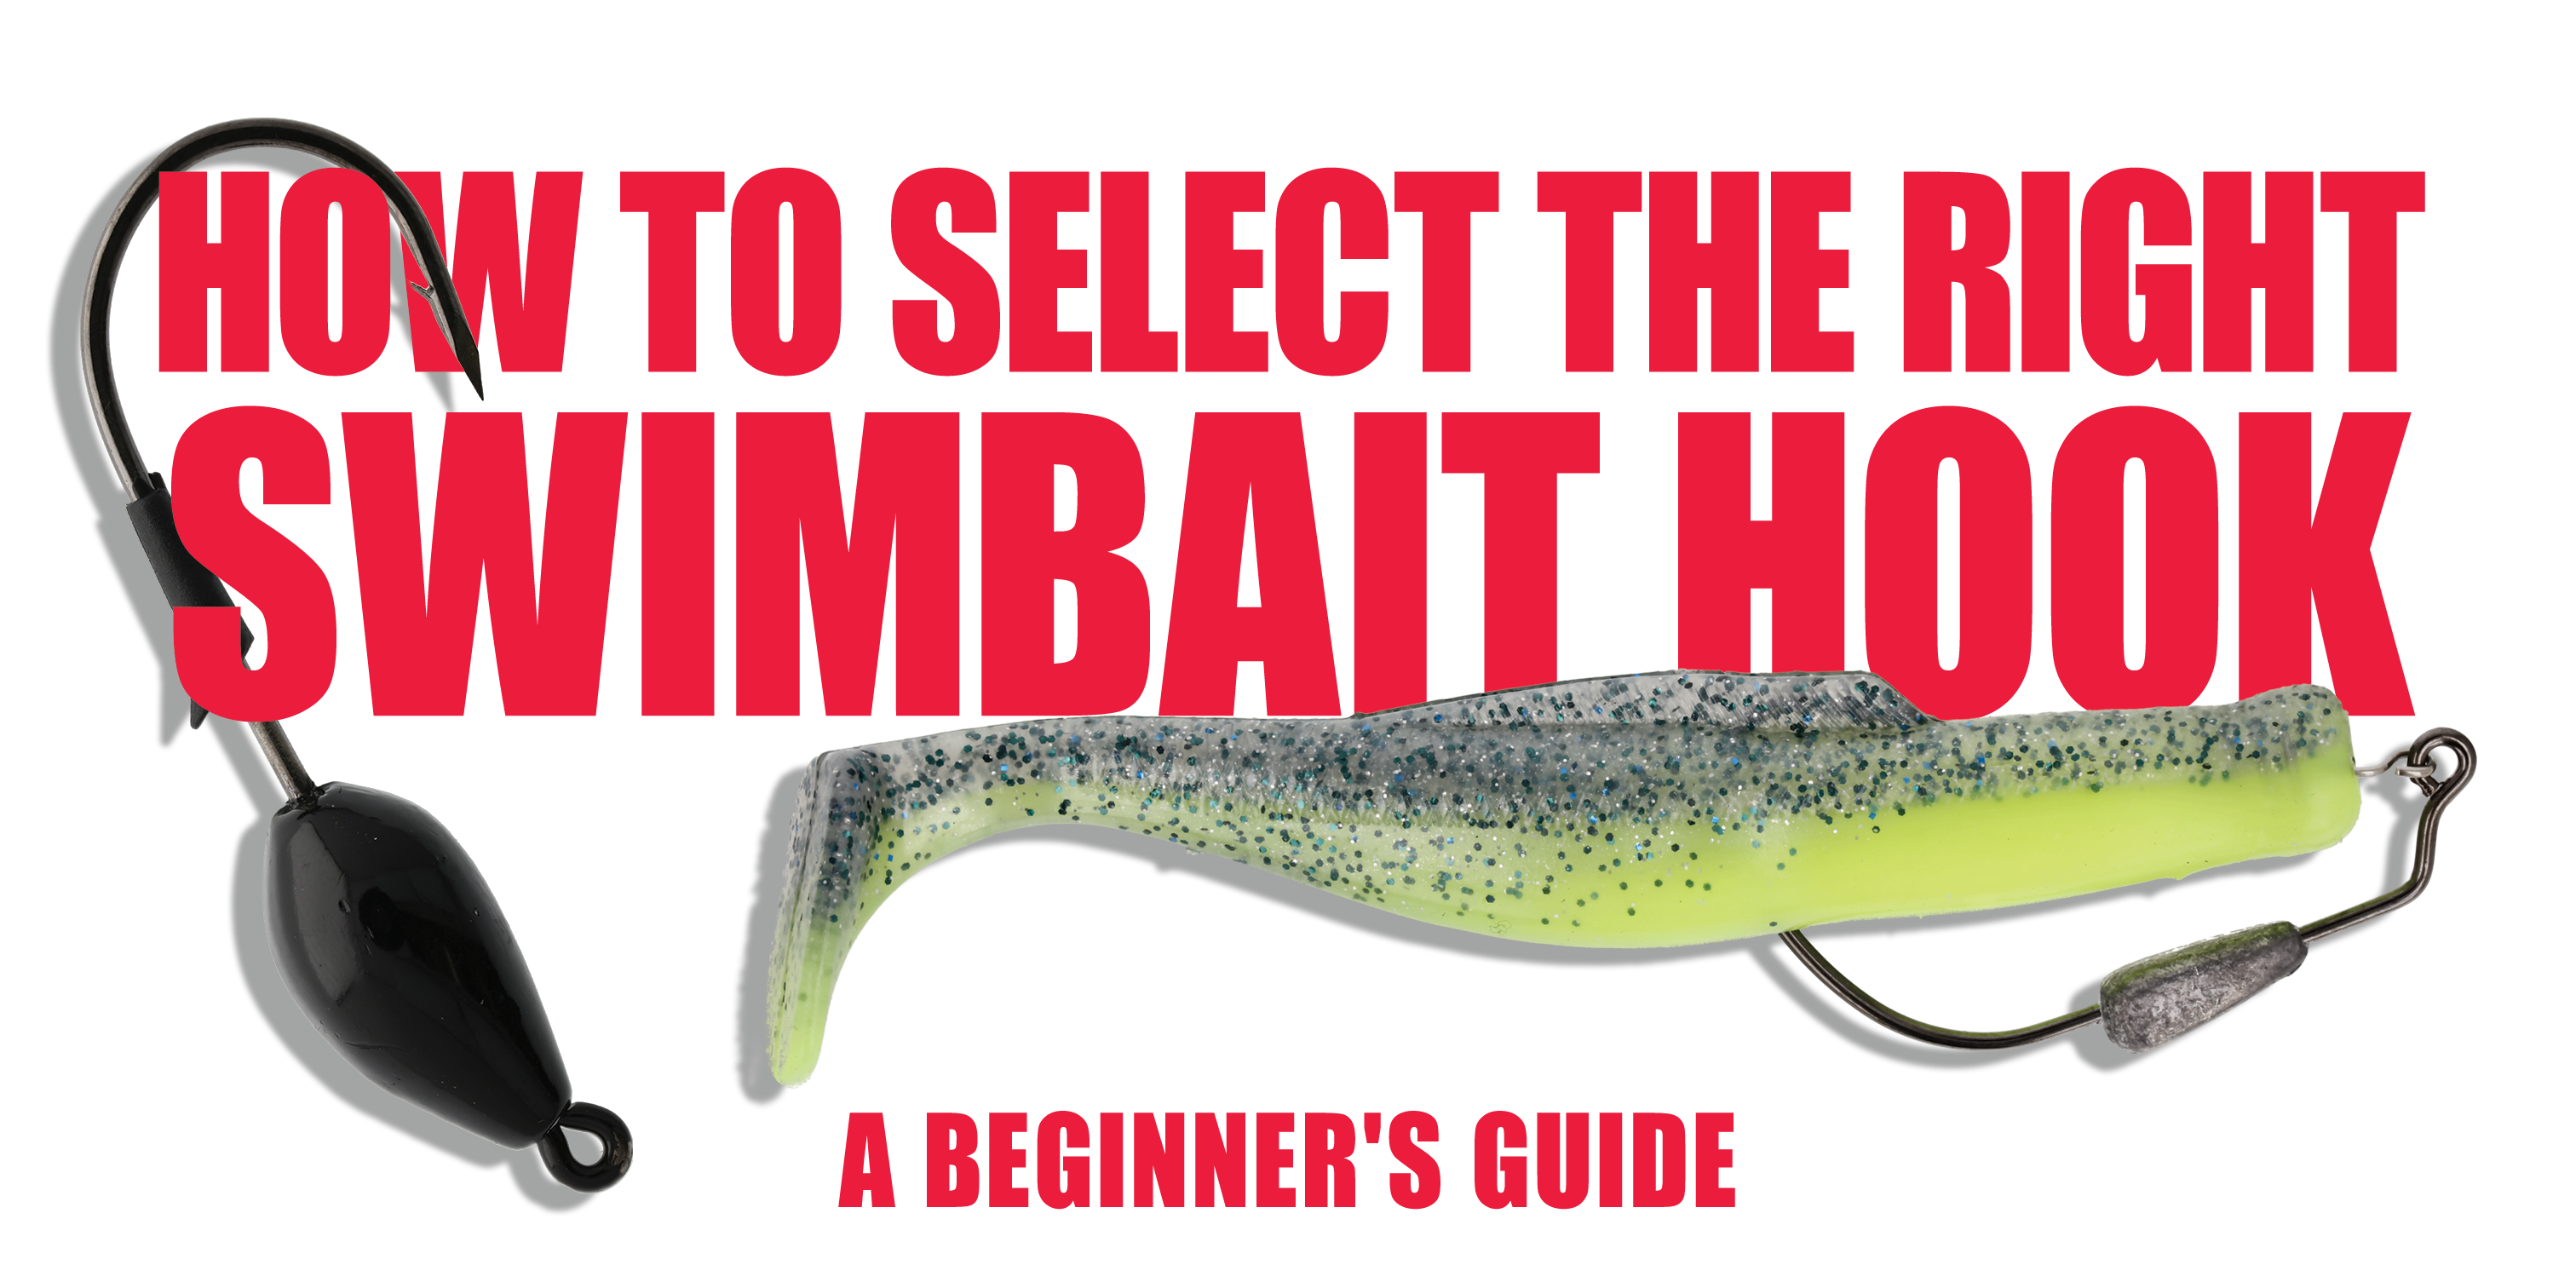 Which setup would you choose and why? (2 identical swim baits